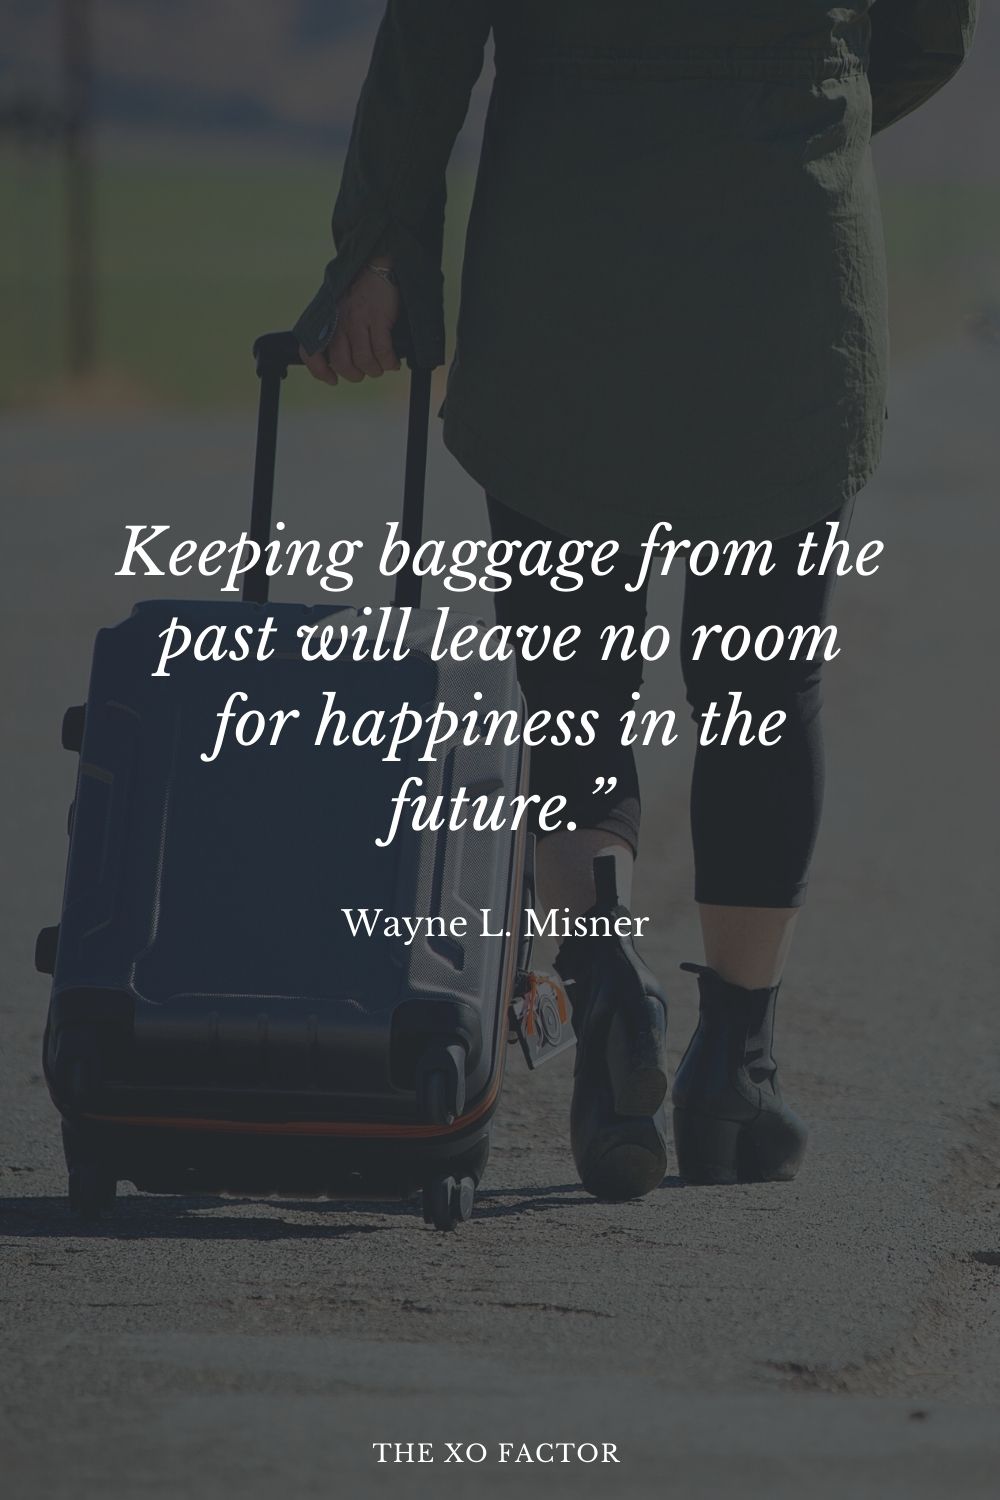 Keeping baggage from the past will leave no room for happiness in the future.” Wayne L. Misner